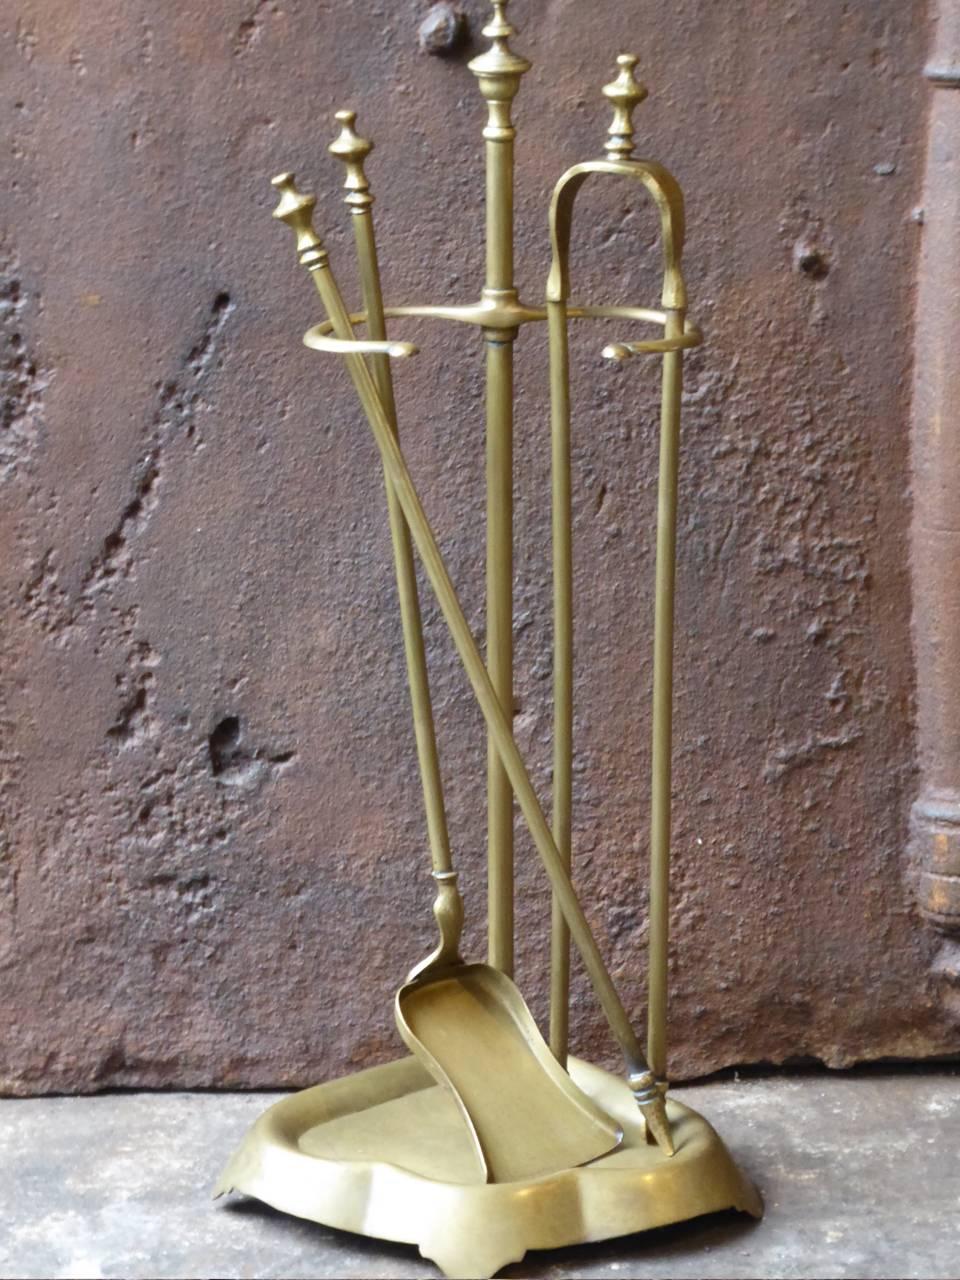 19th century French fireplace tool set - fire irons made of brass.